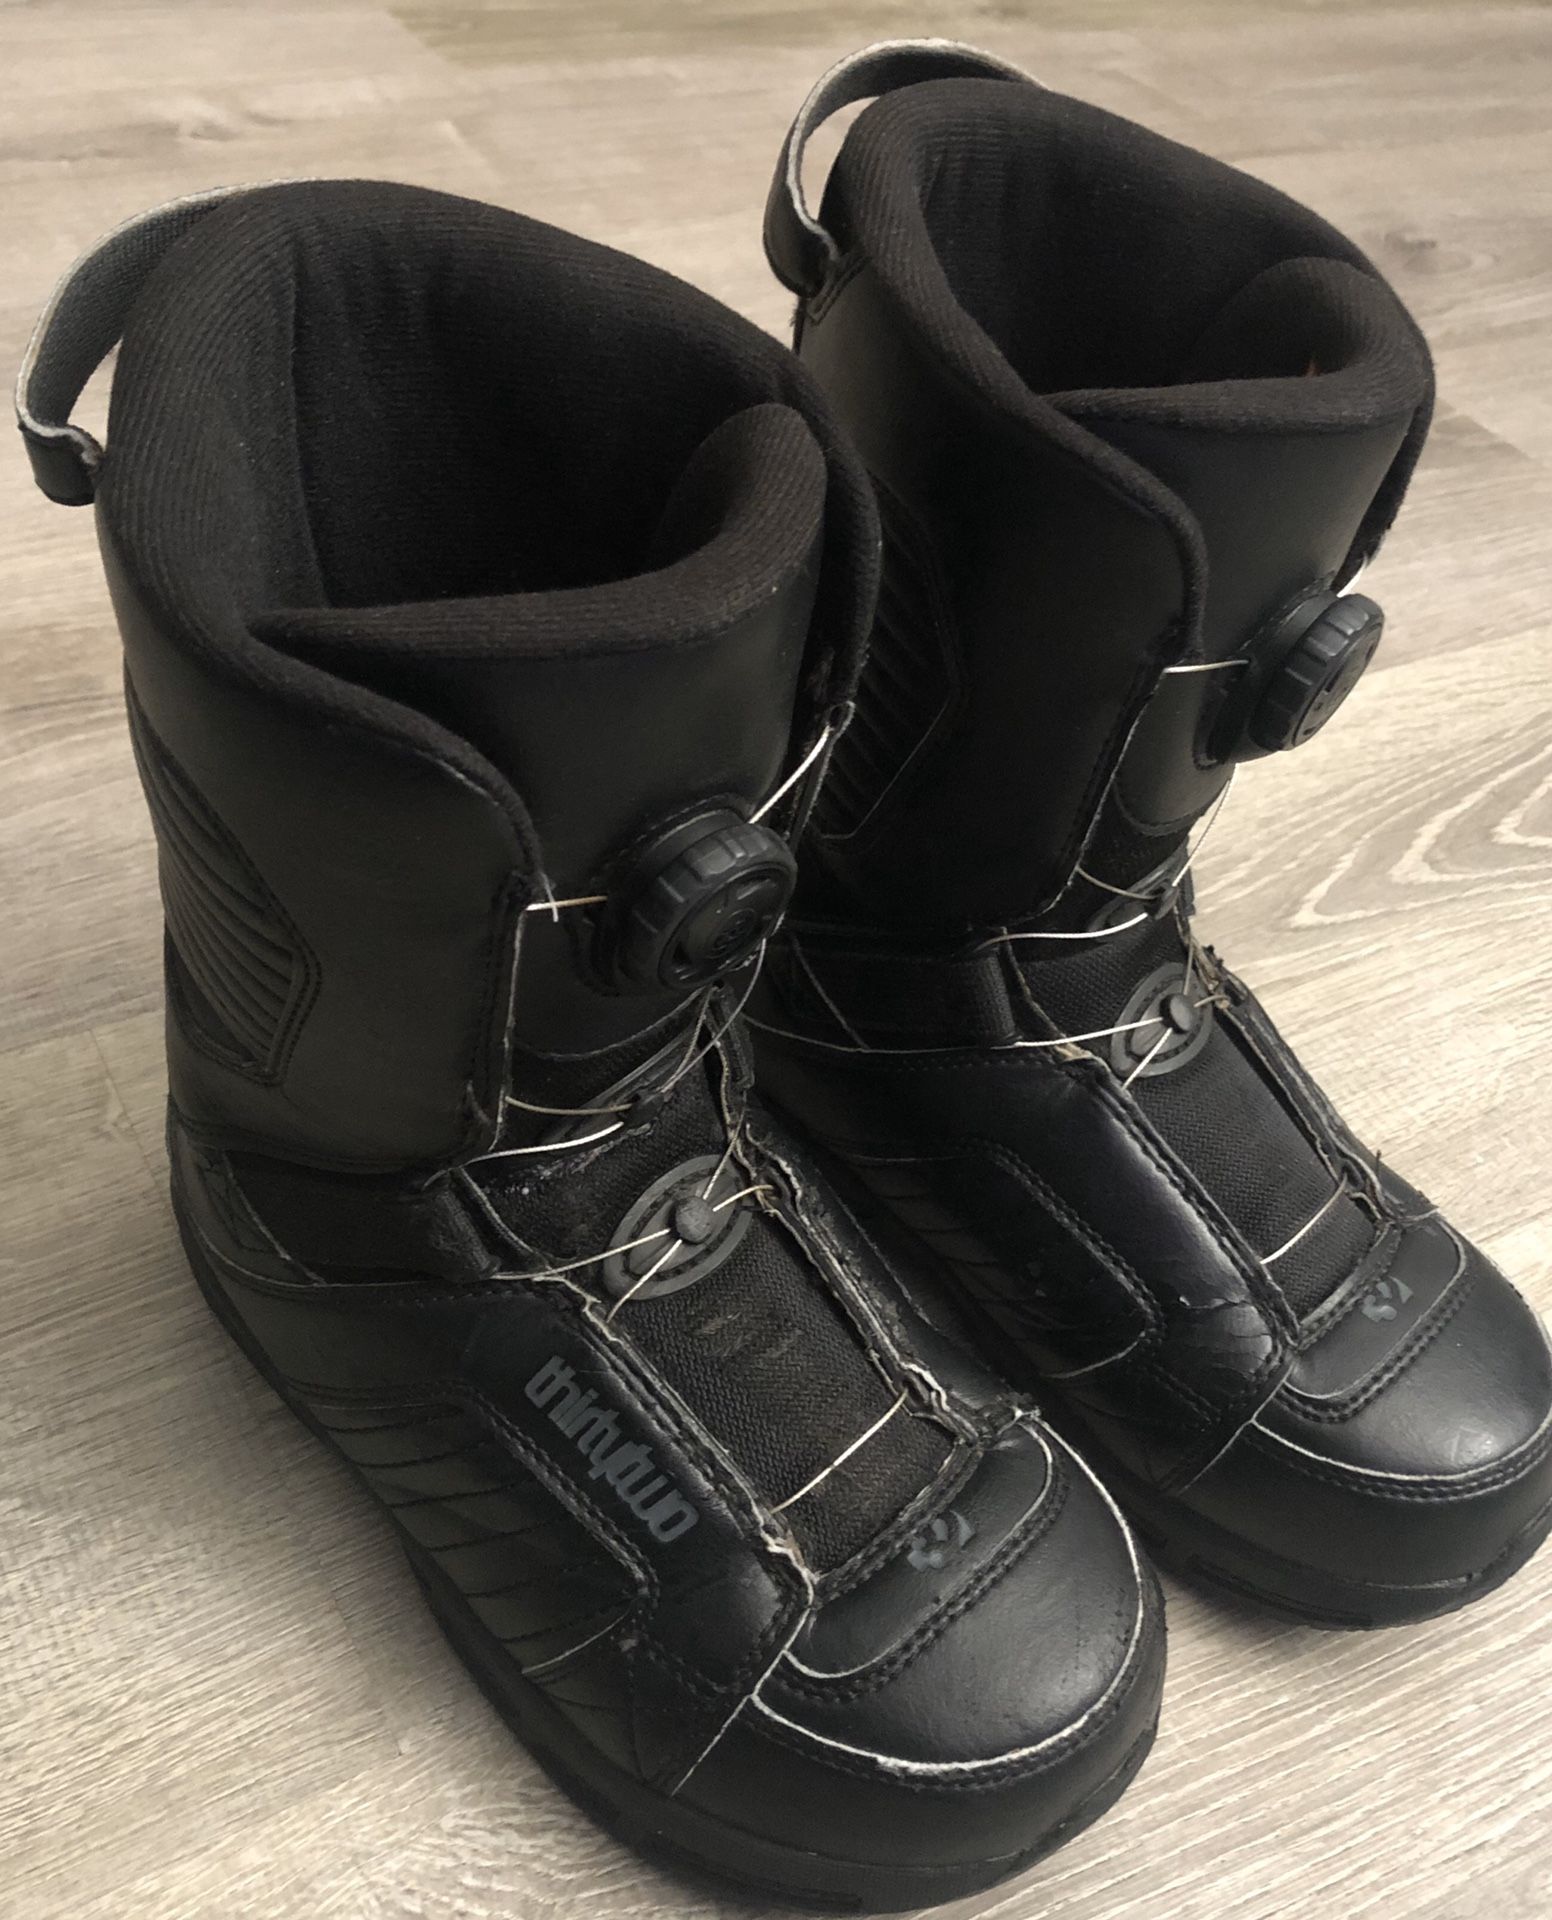 Boys ThirtyTwo Snowboard Boots size 5 youth kids child 32